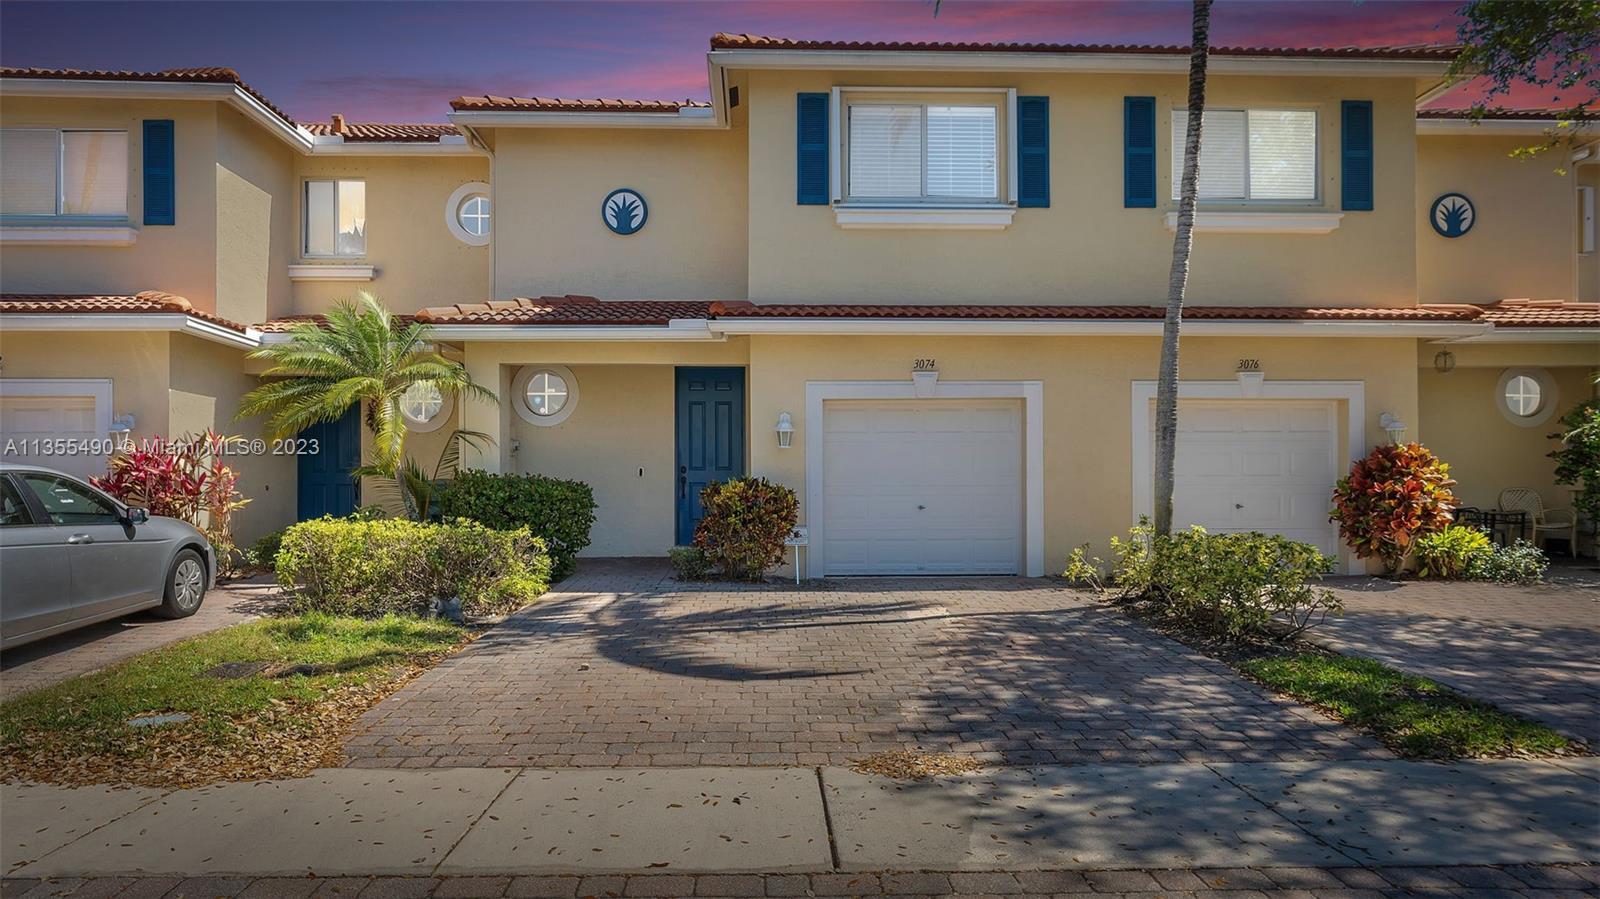 Come home to this tranquil hidden gem community in Boynton Beach. This beautiful 3 bed 2 1/2 bath to